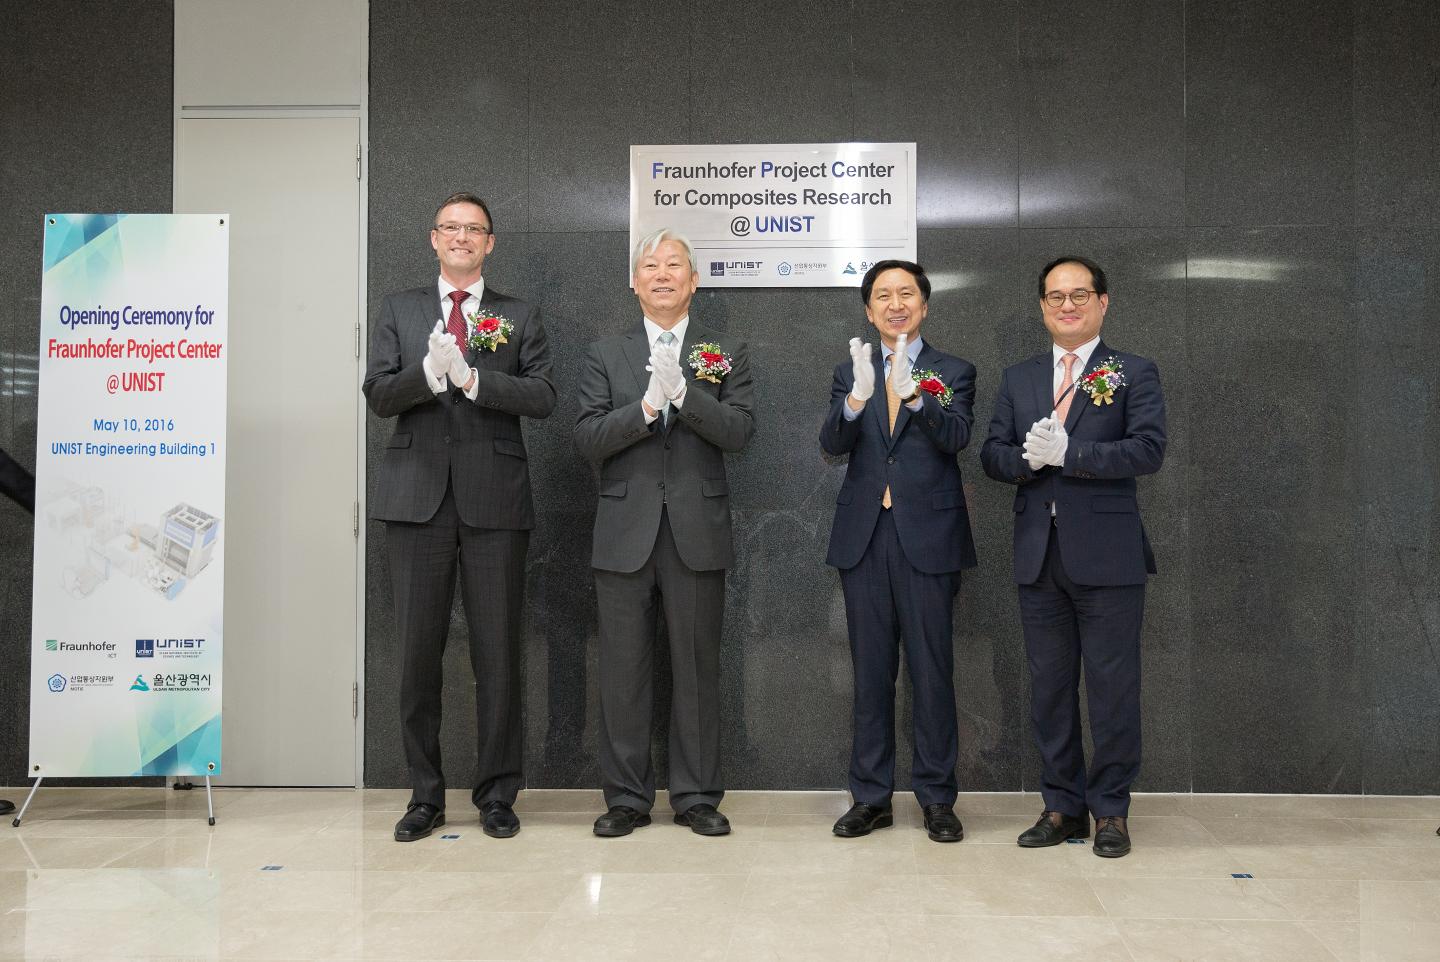 Frank Henning, Fraunhofer, Mooyoung Jung, UNIST, Gi-Hyeon Kim and Yon-Rea Kim, MOTIE 